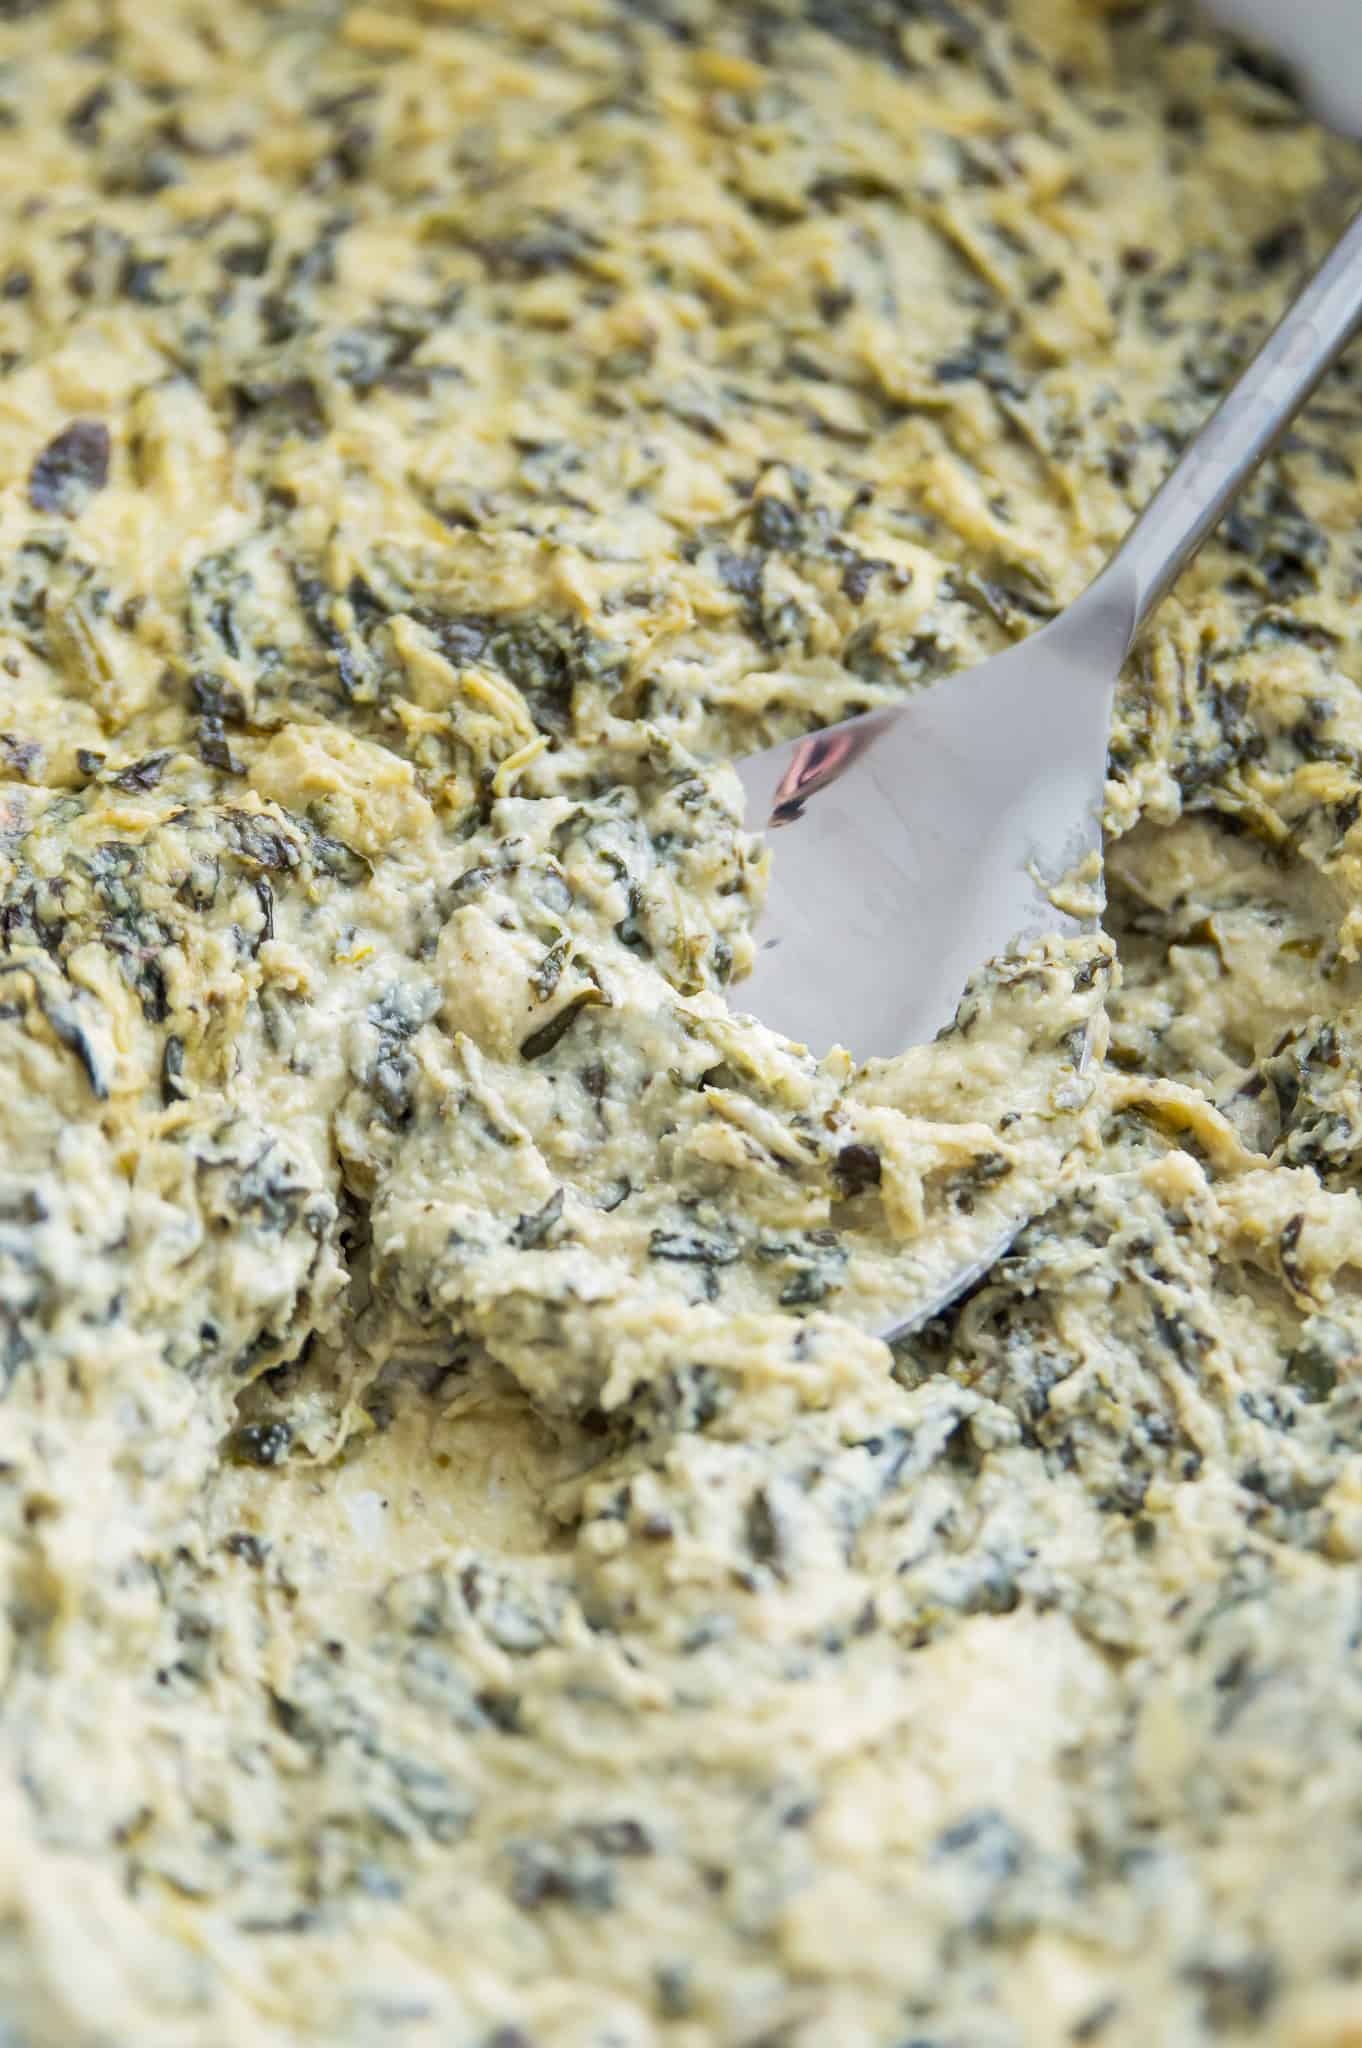 A serving spoon in a casserole dish filled with a spinach and artichoke dip.